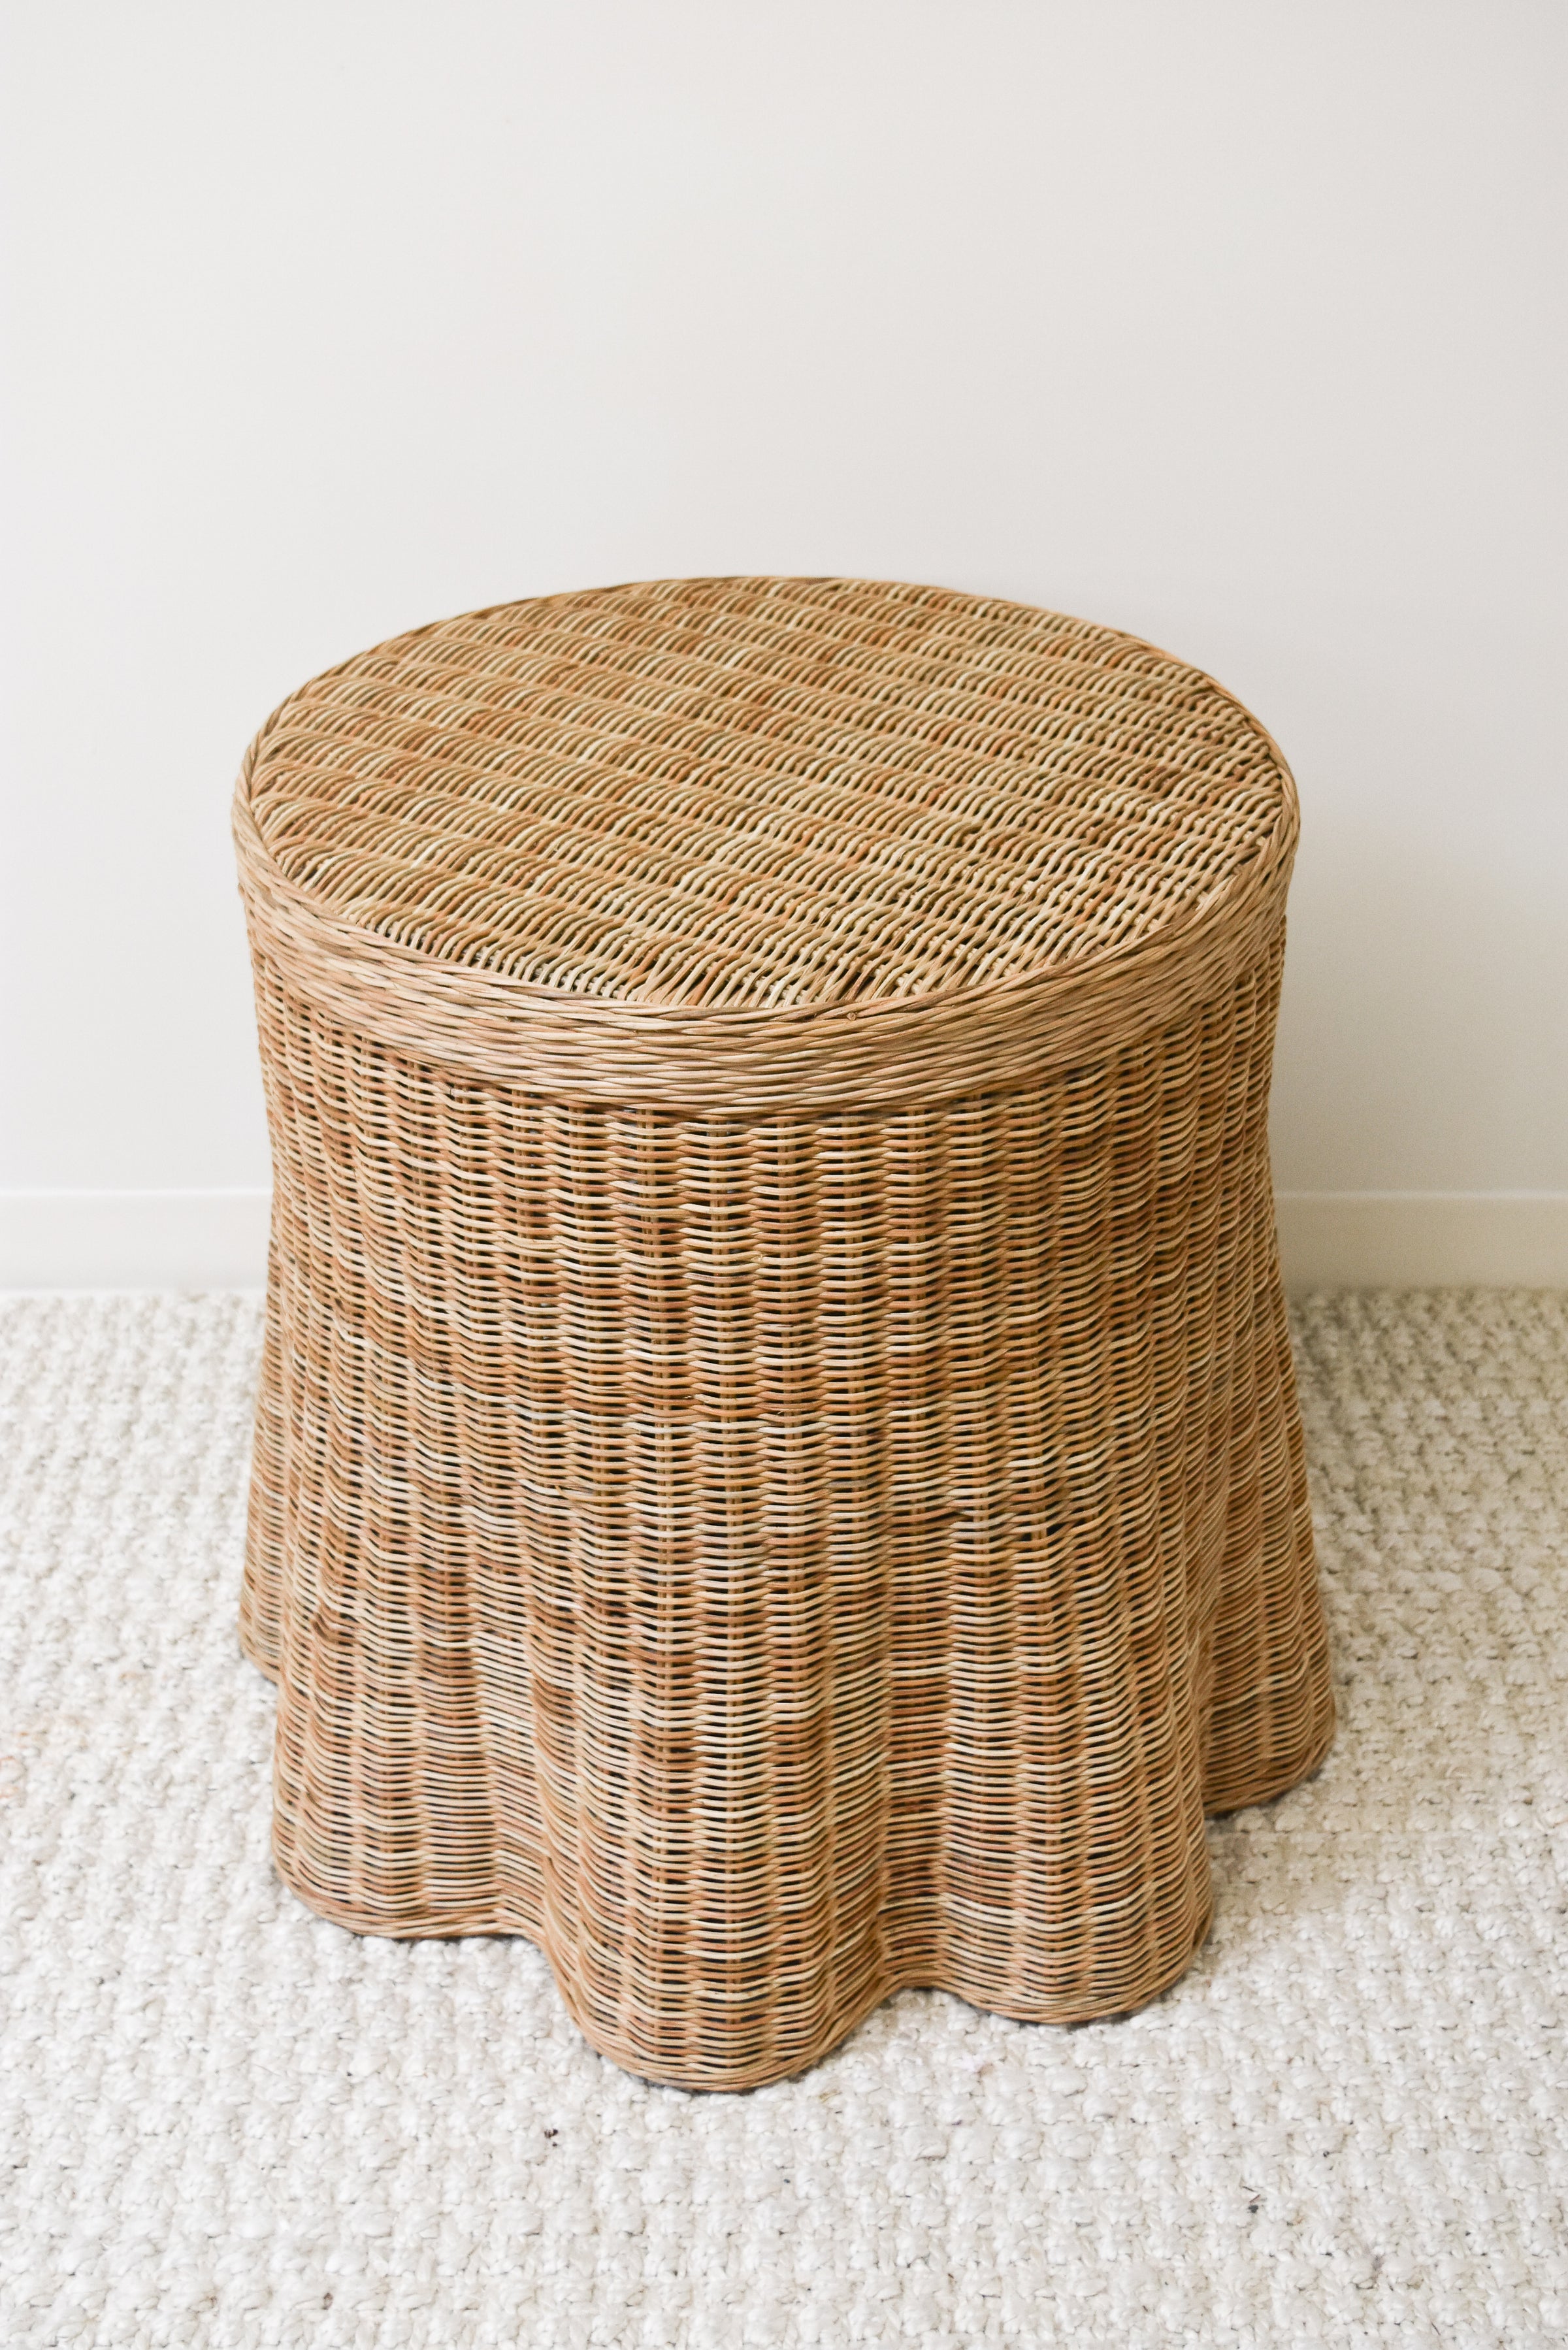 Natural Scallop Side Table